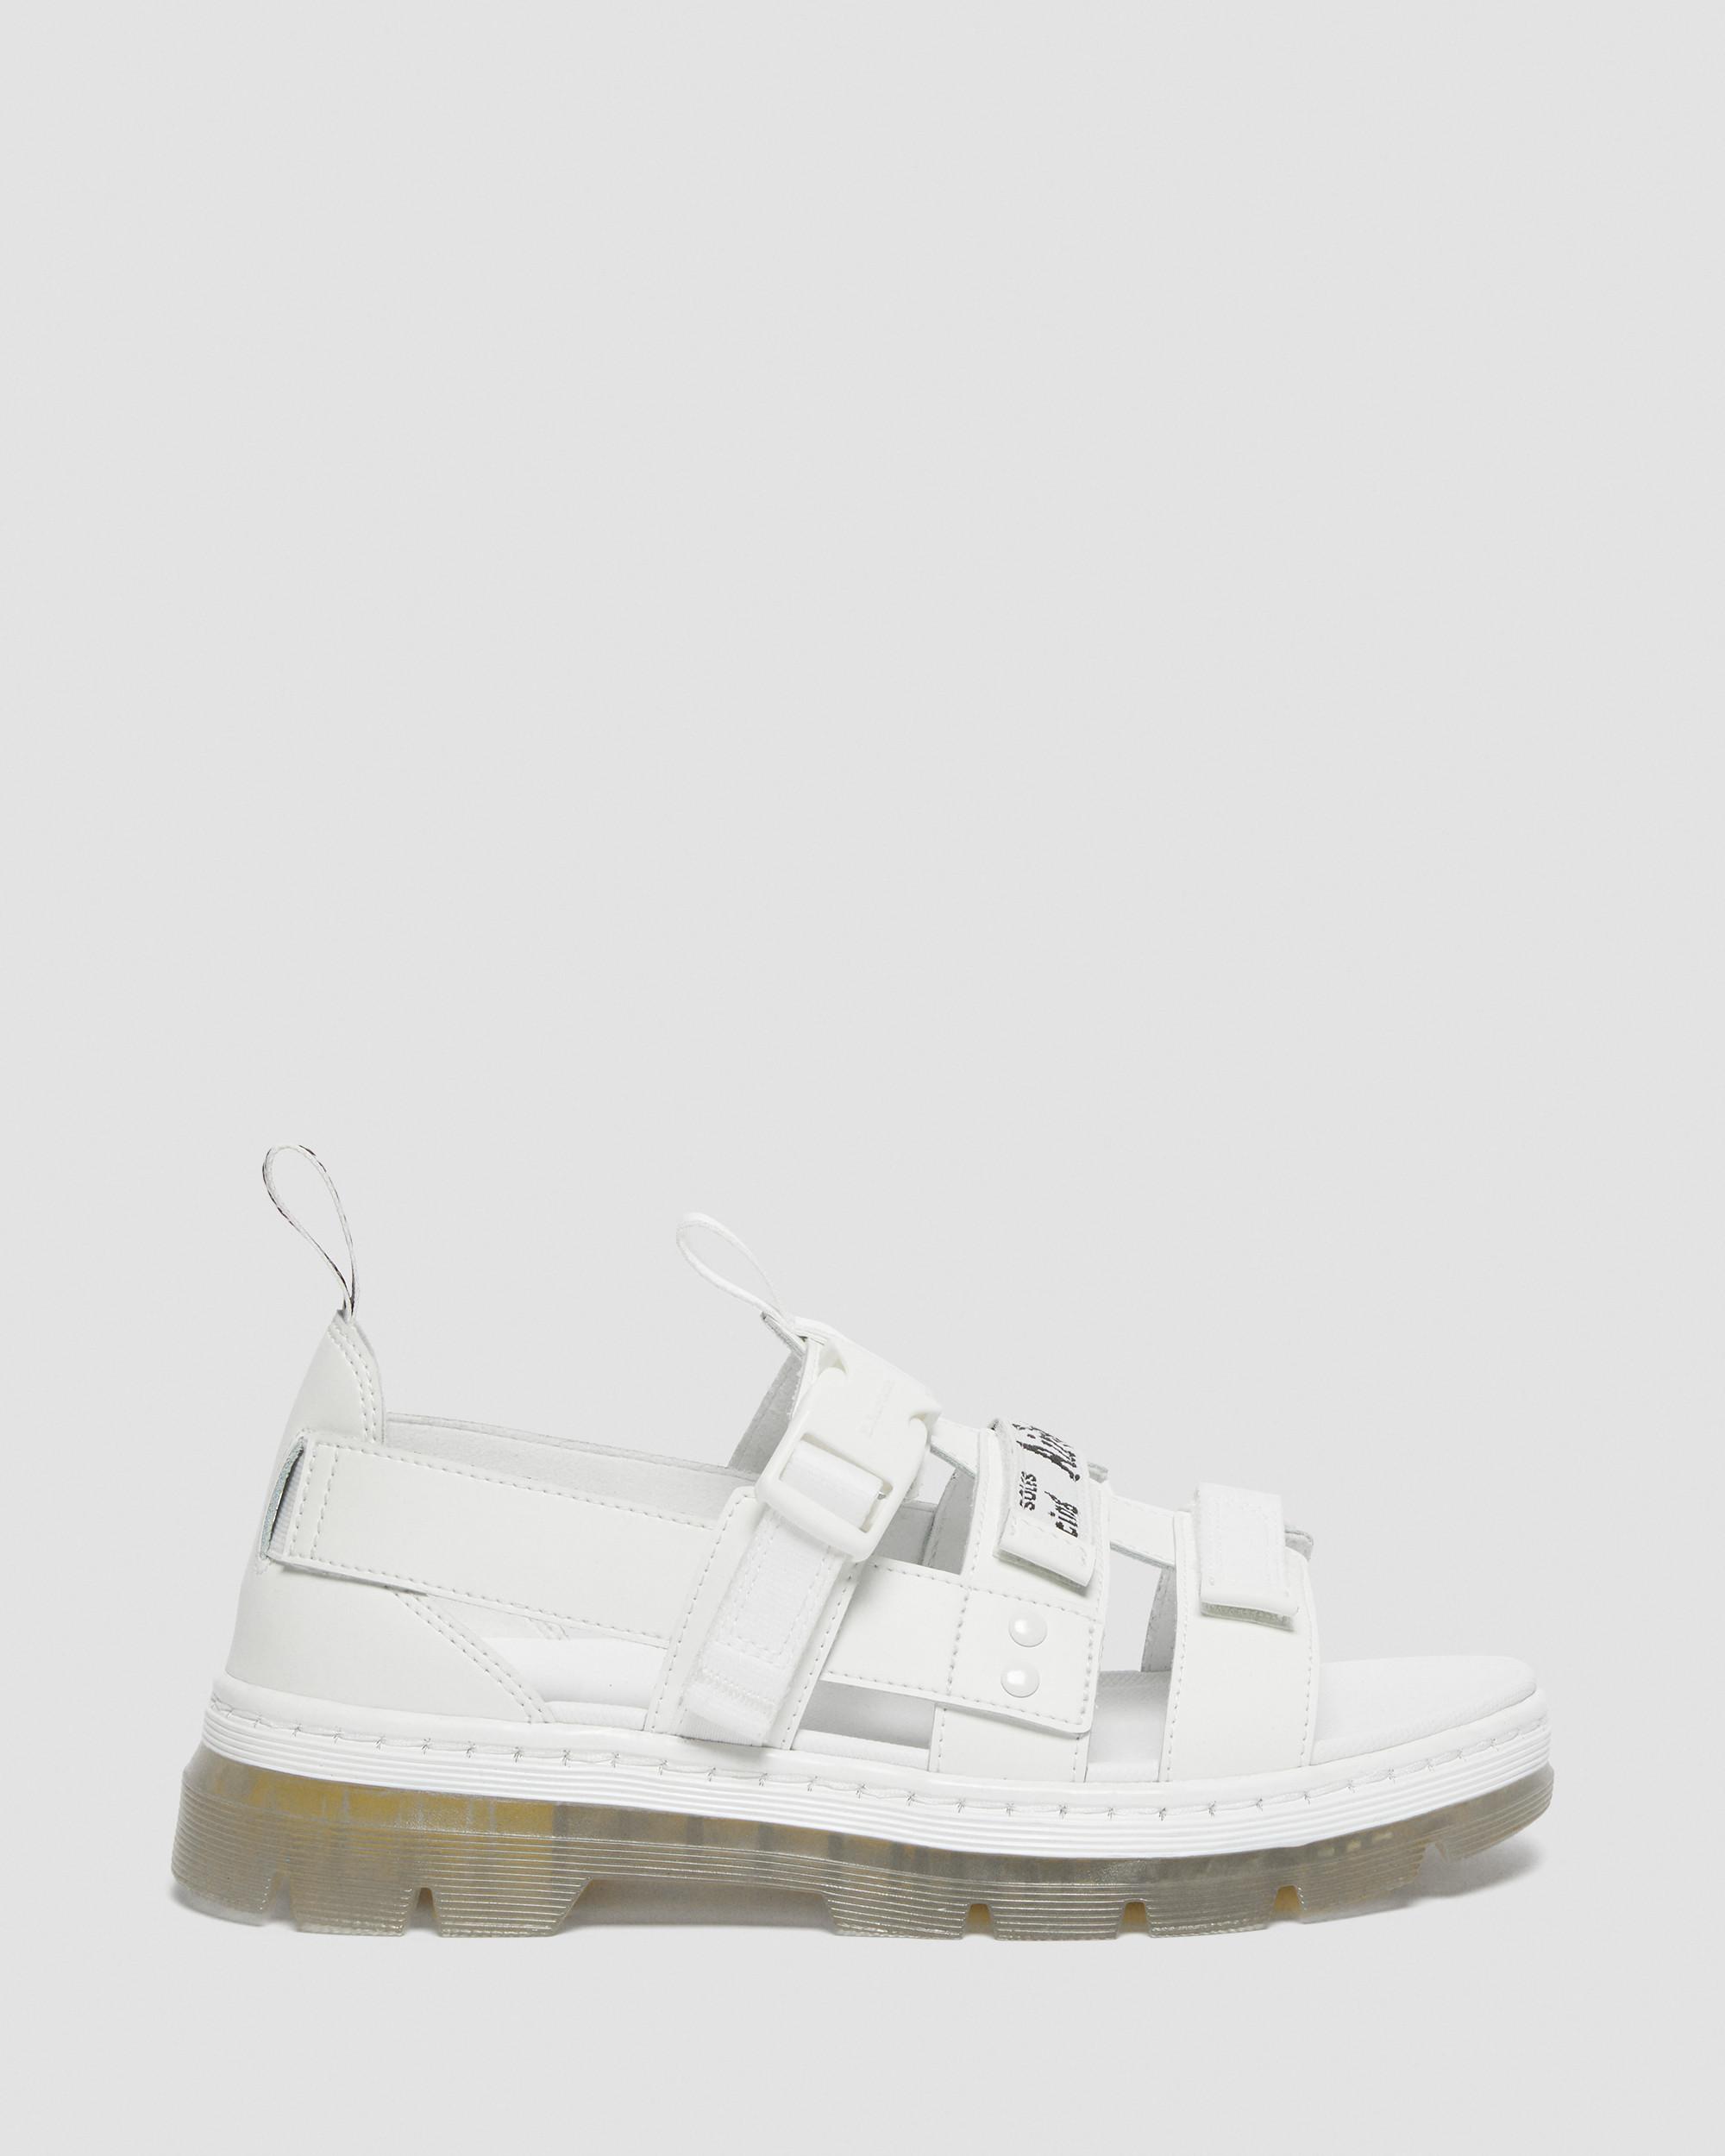 Pearson Iced Webbing Sandals in White